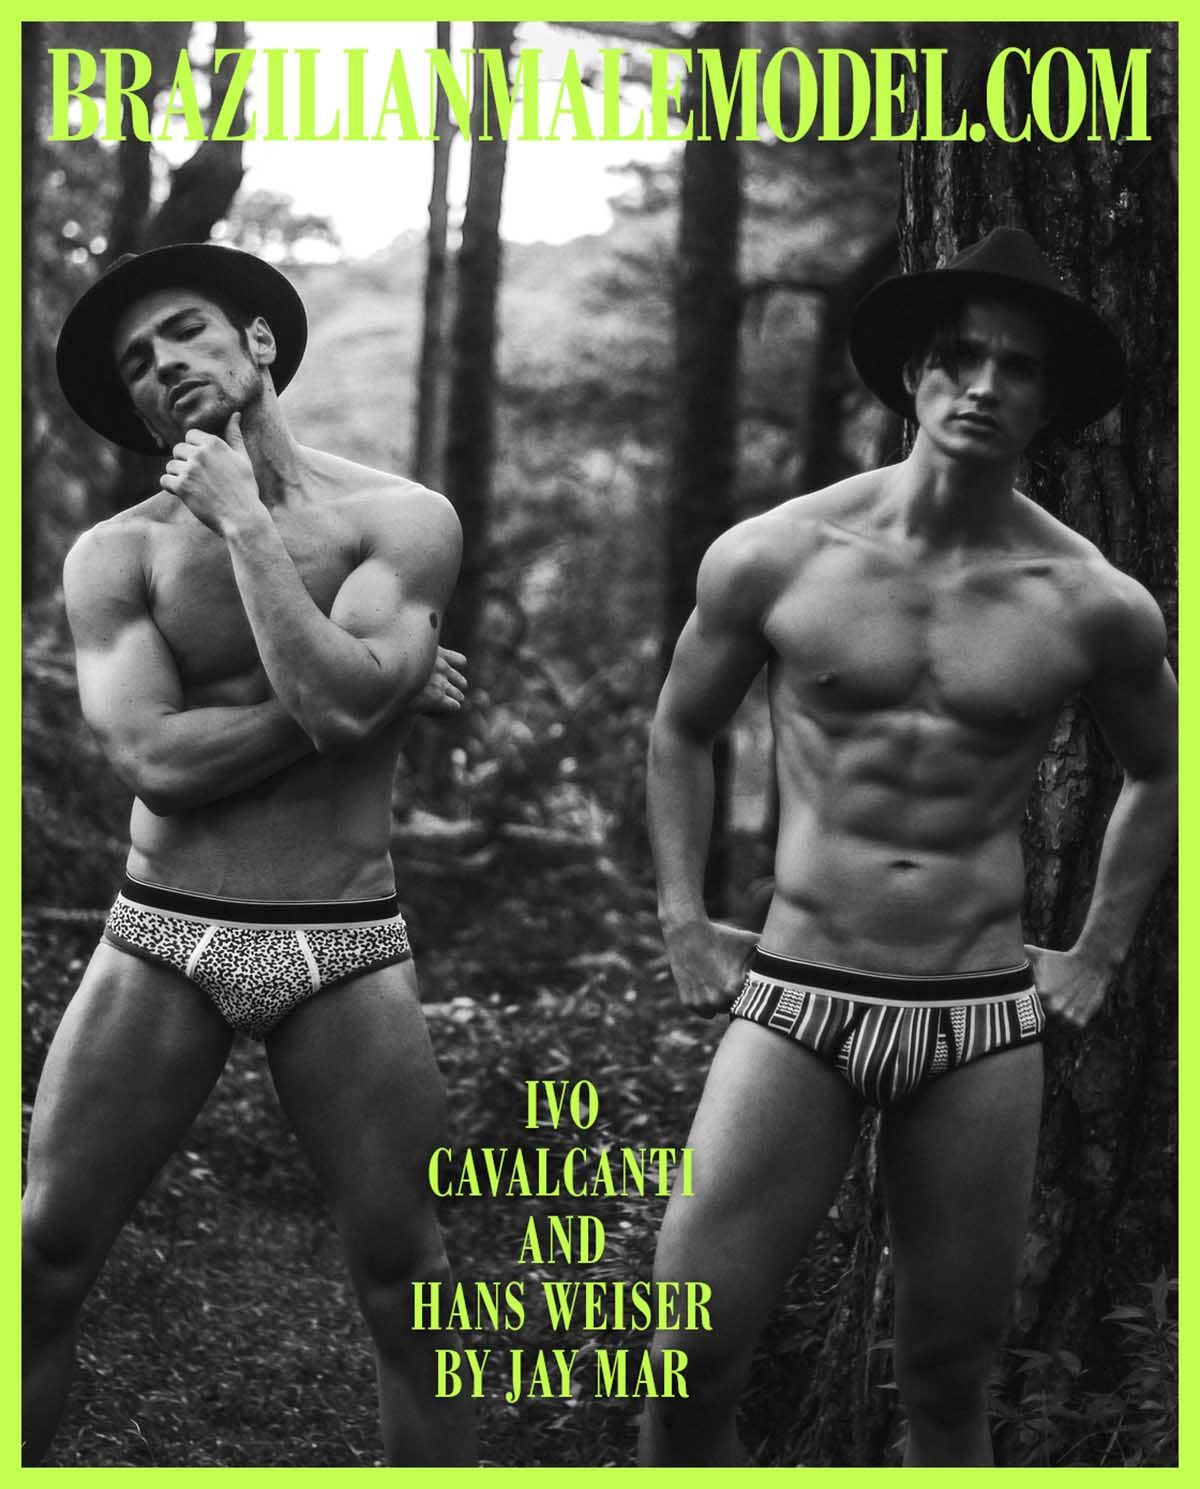 Ivo Cavalcanti and Hans Weiser by Jay Mar